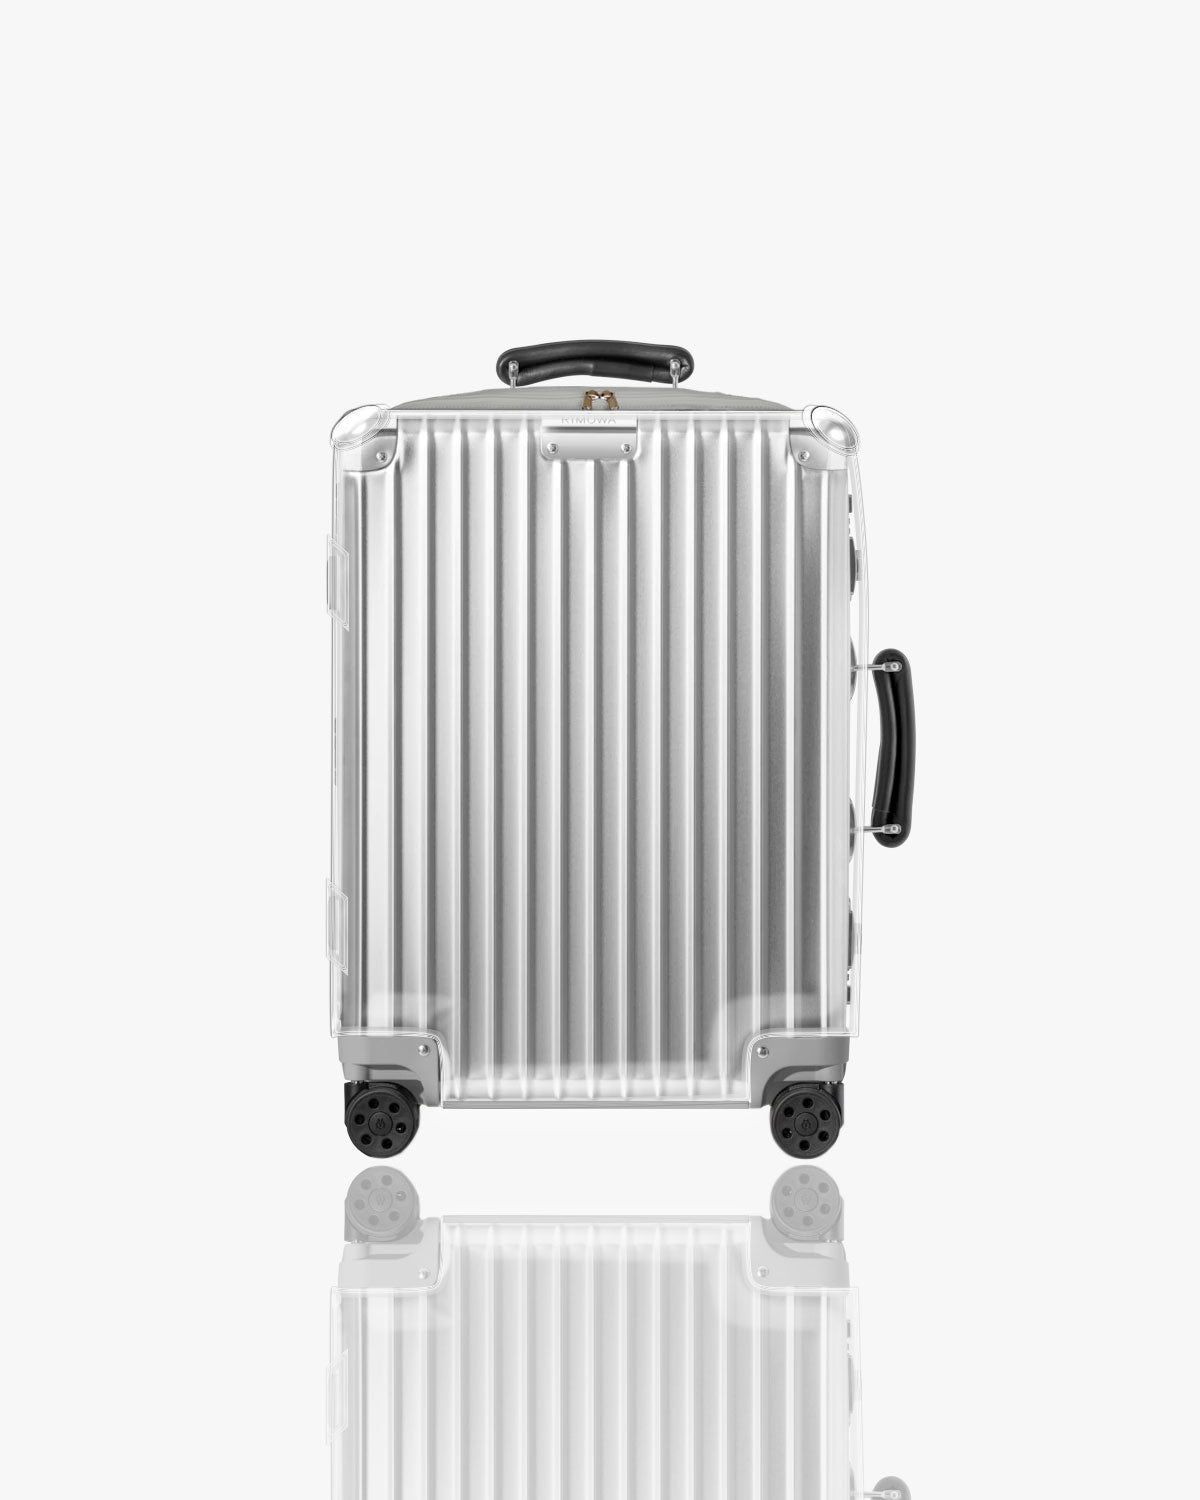 973 CLASSIC - Clear Protective Luggage Cover